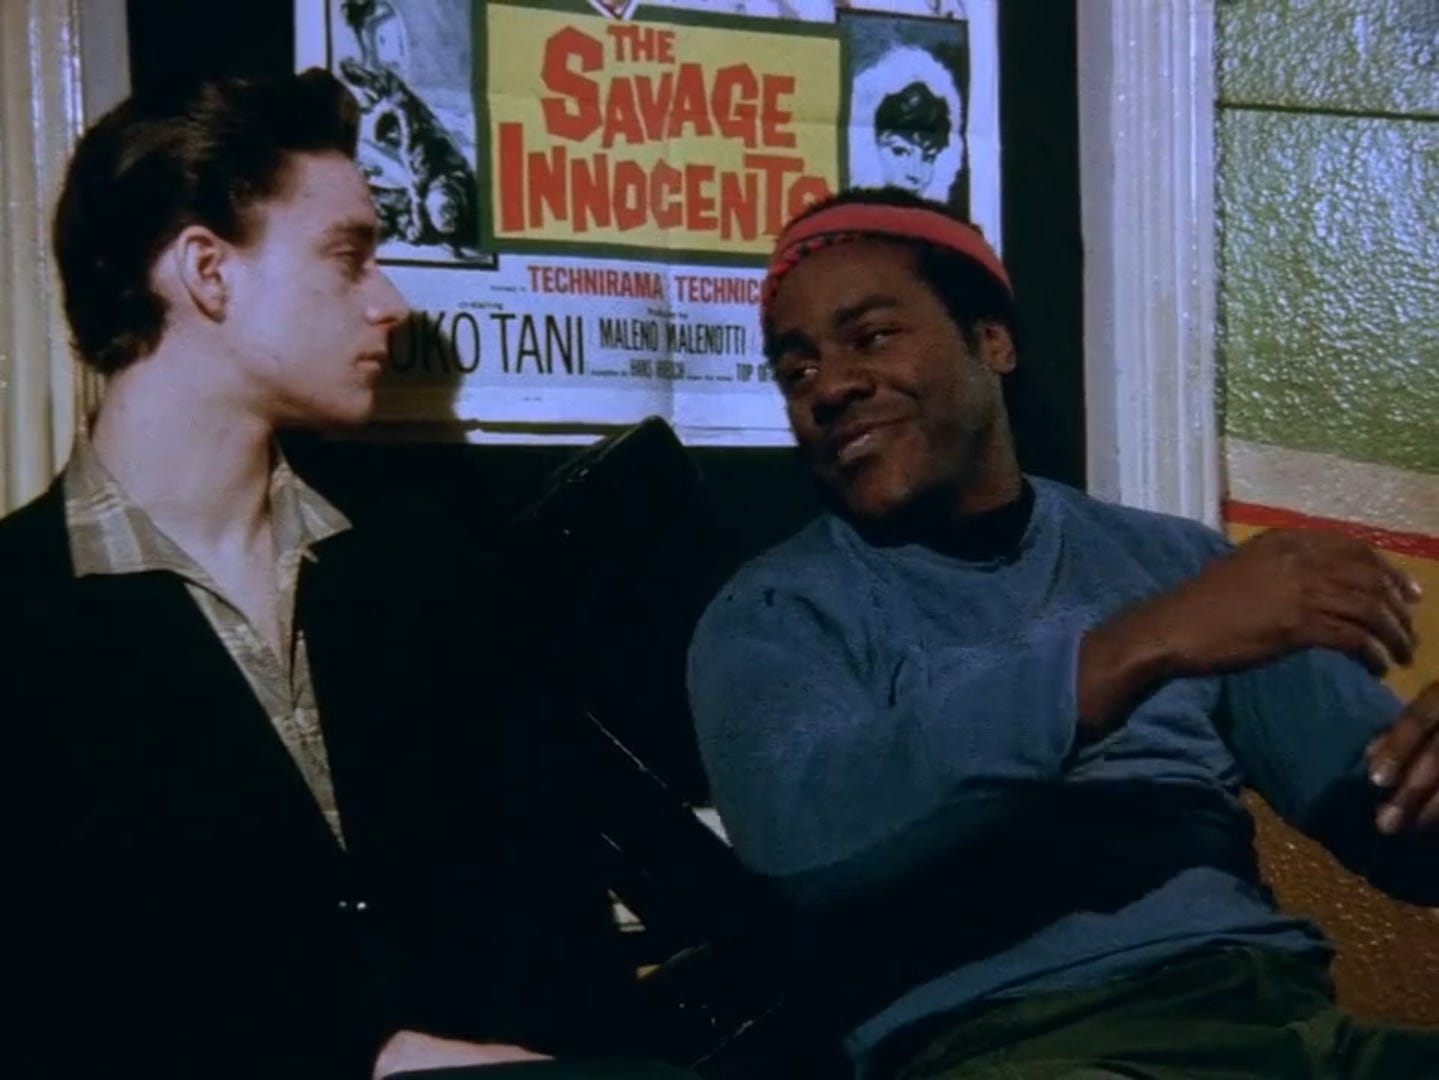 Allie (on the left) listens to Frankie Faison’s character telling him a story.